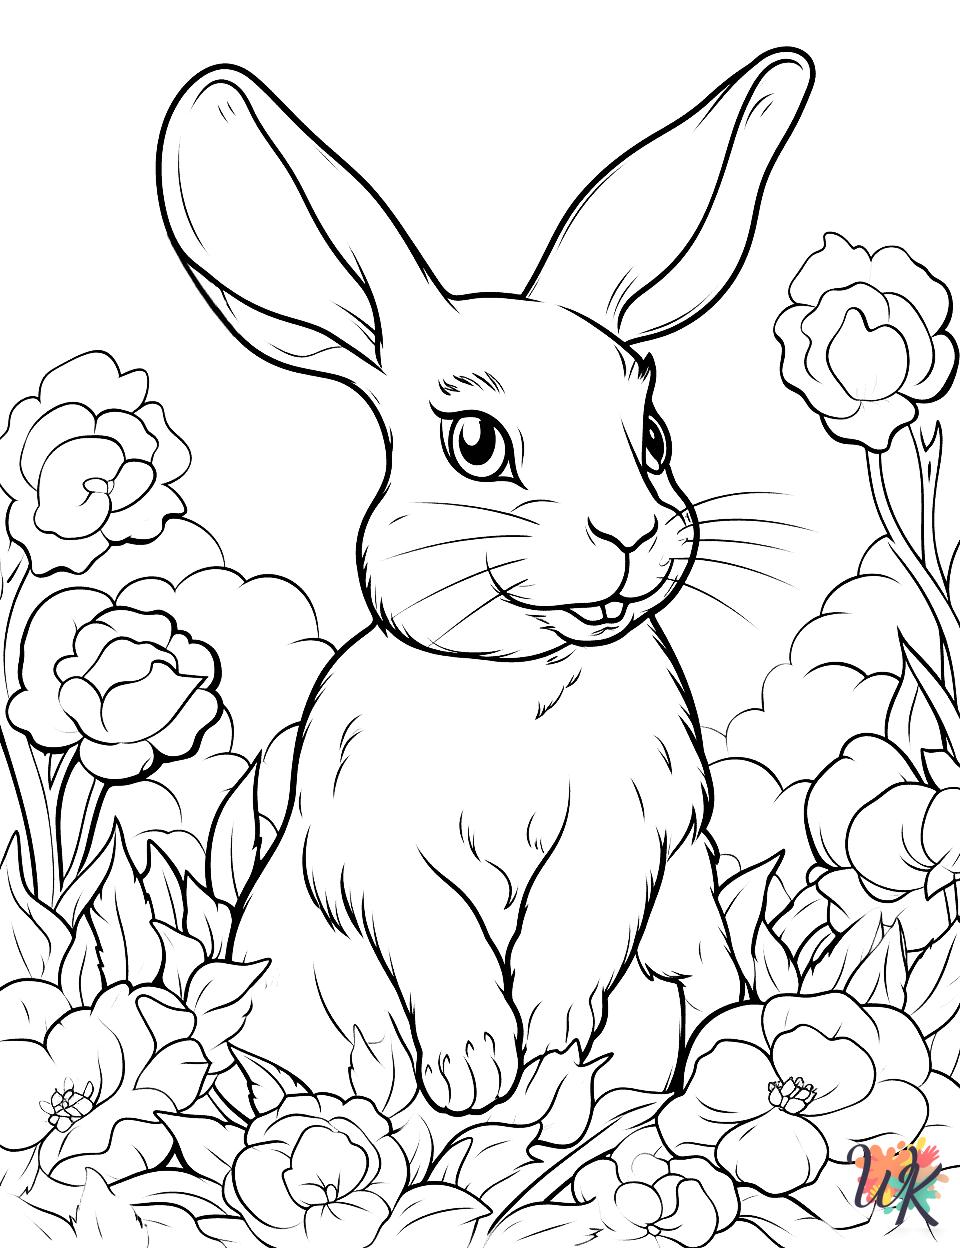 Rabbits coloring pages for adults easy